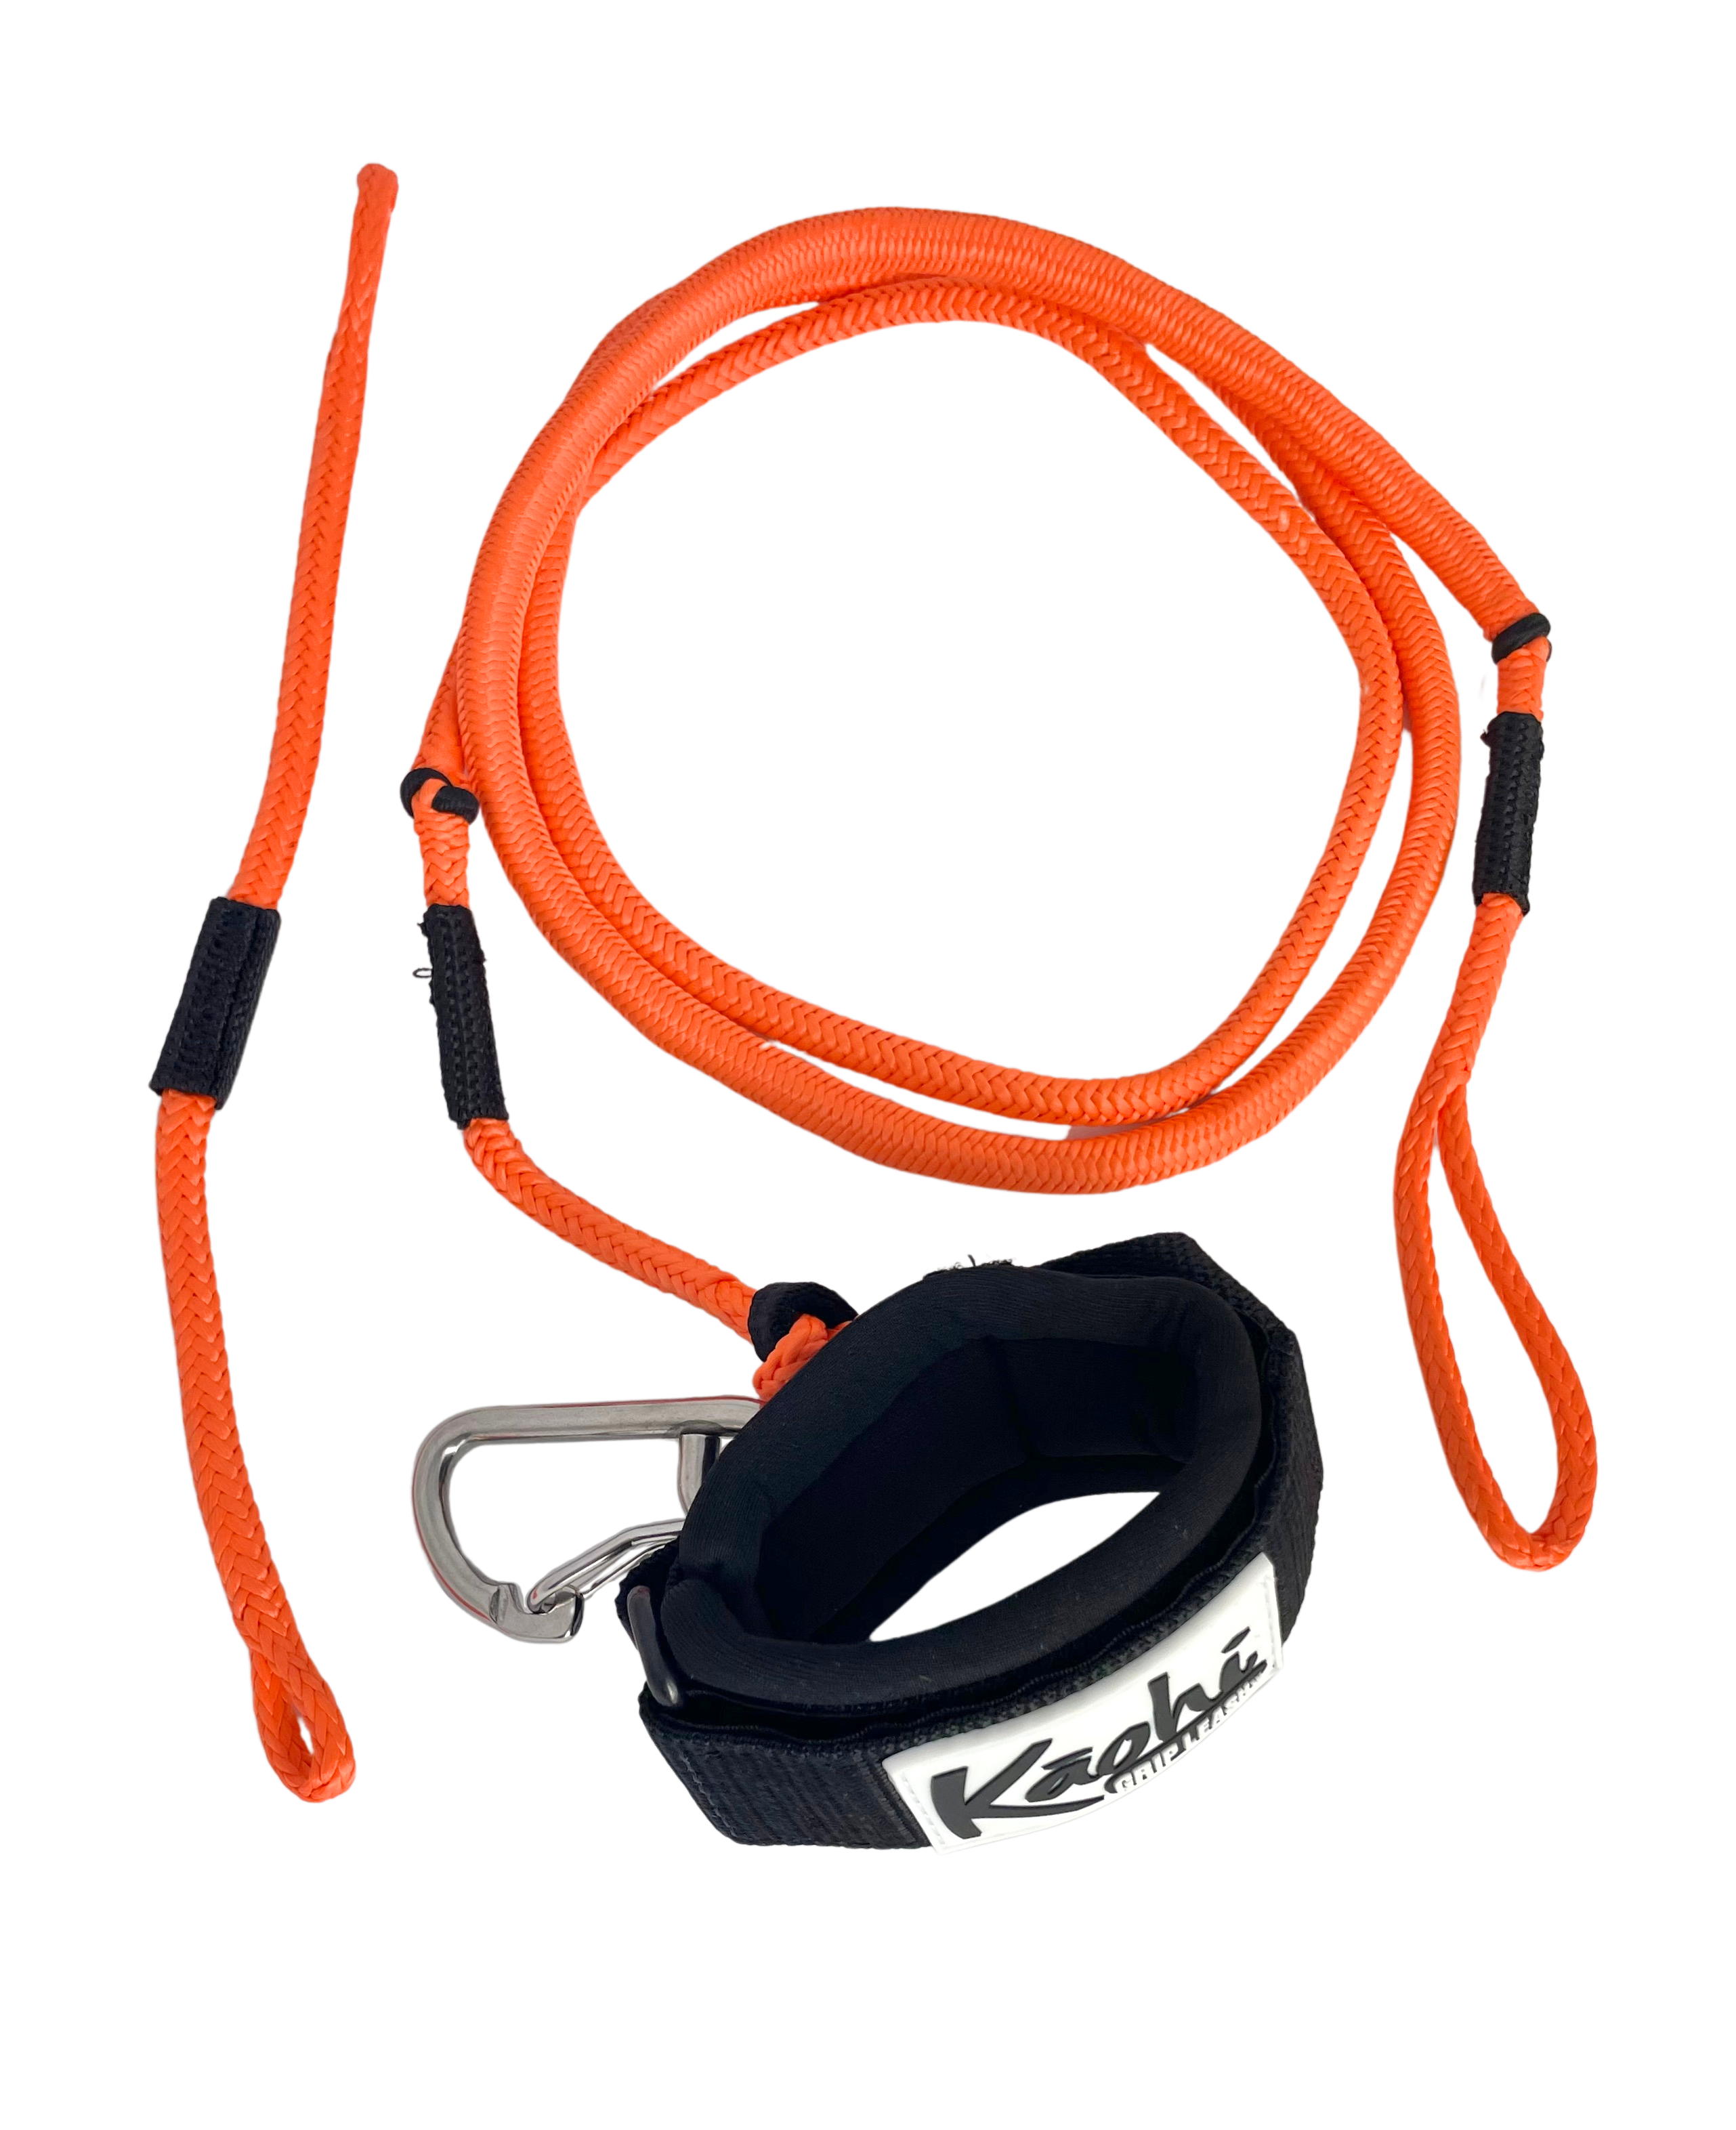 orange bungee style wing leash with Kāohi wrist cuff with carabiner for wing foiling sup wing wingfoil wingfoiling leash  pronefoil  downwind SUP  foilboard foilboarding hydrofoil